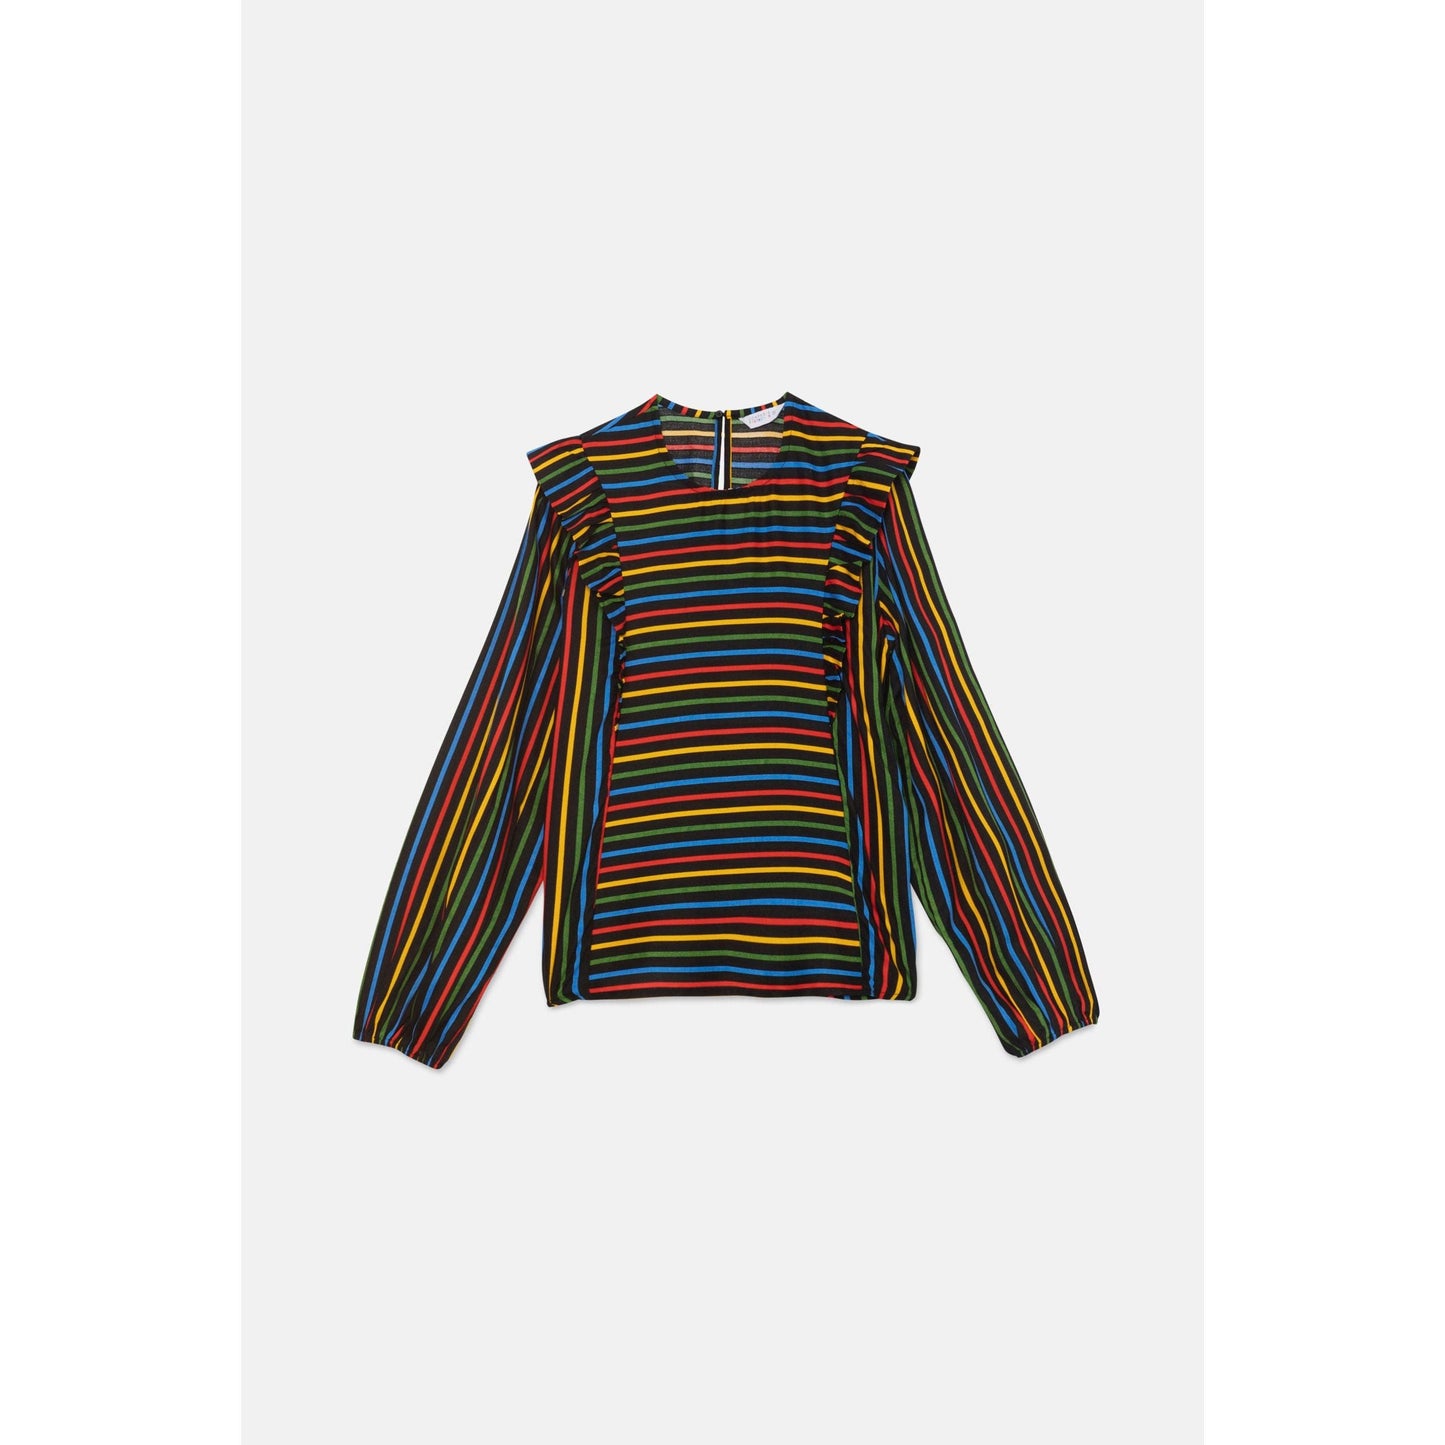 Compania Fantastica - Long-sleeved top with ruffles and multicolored stripe print